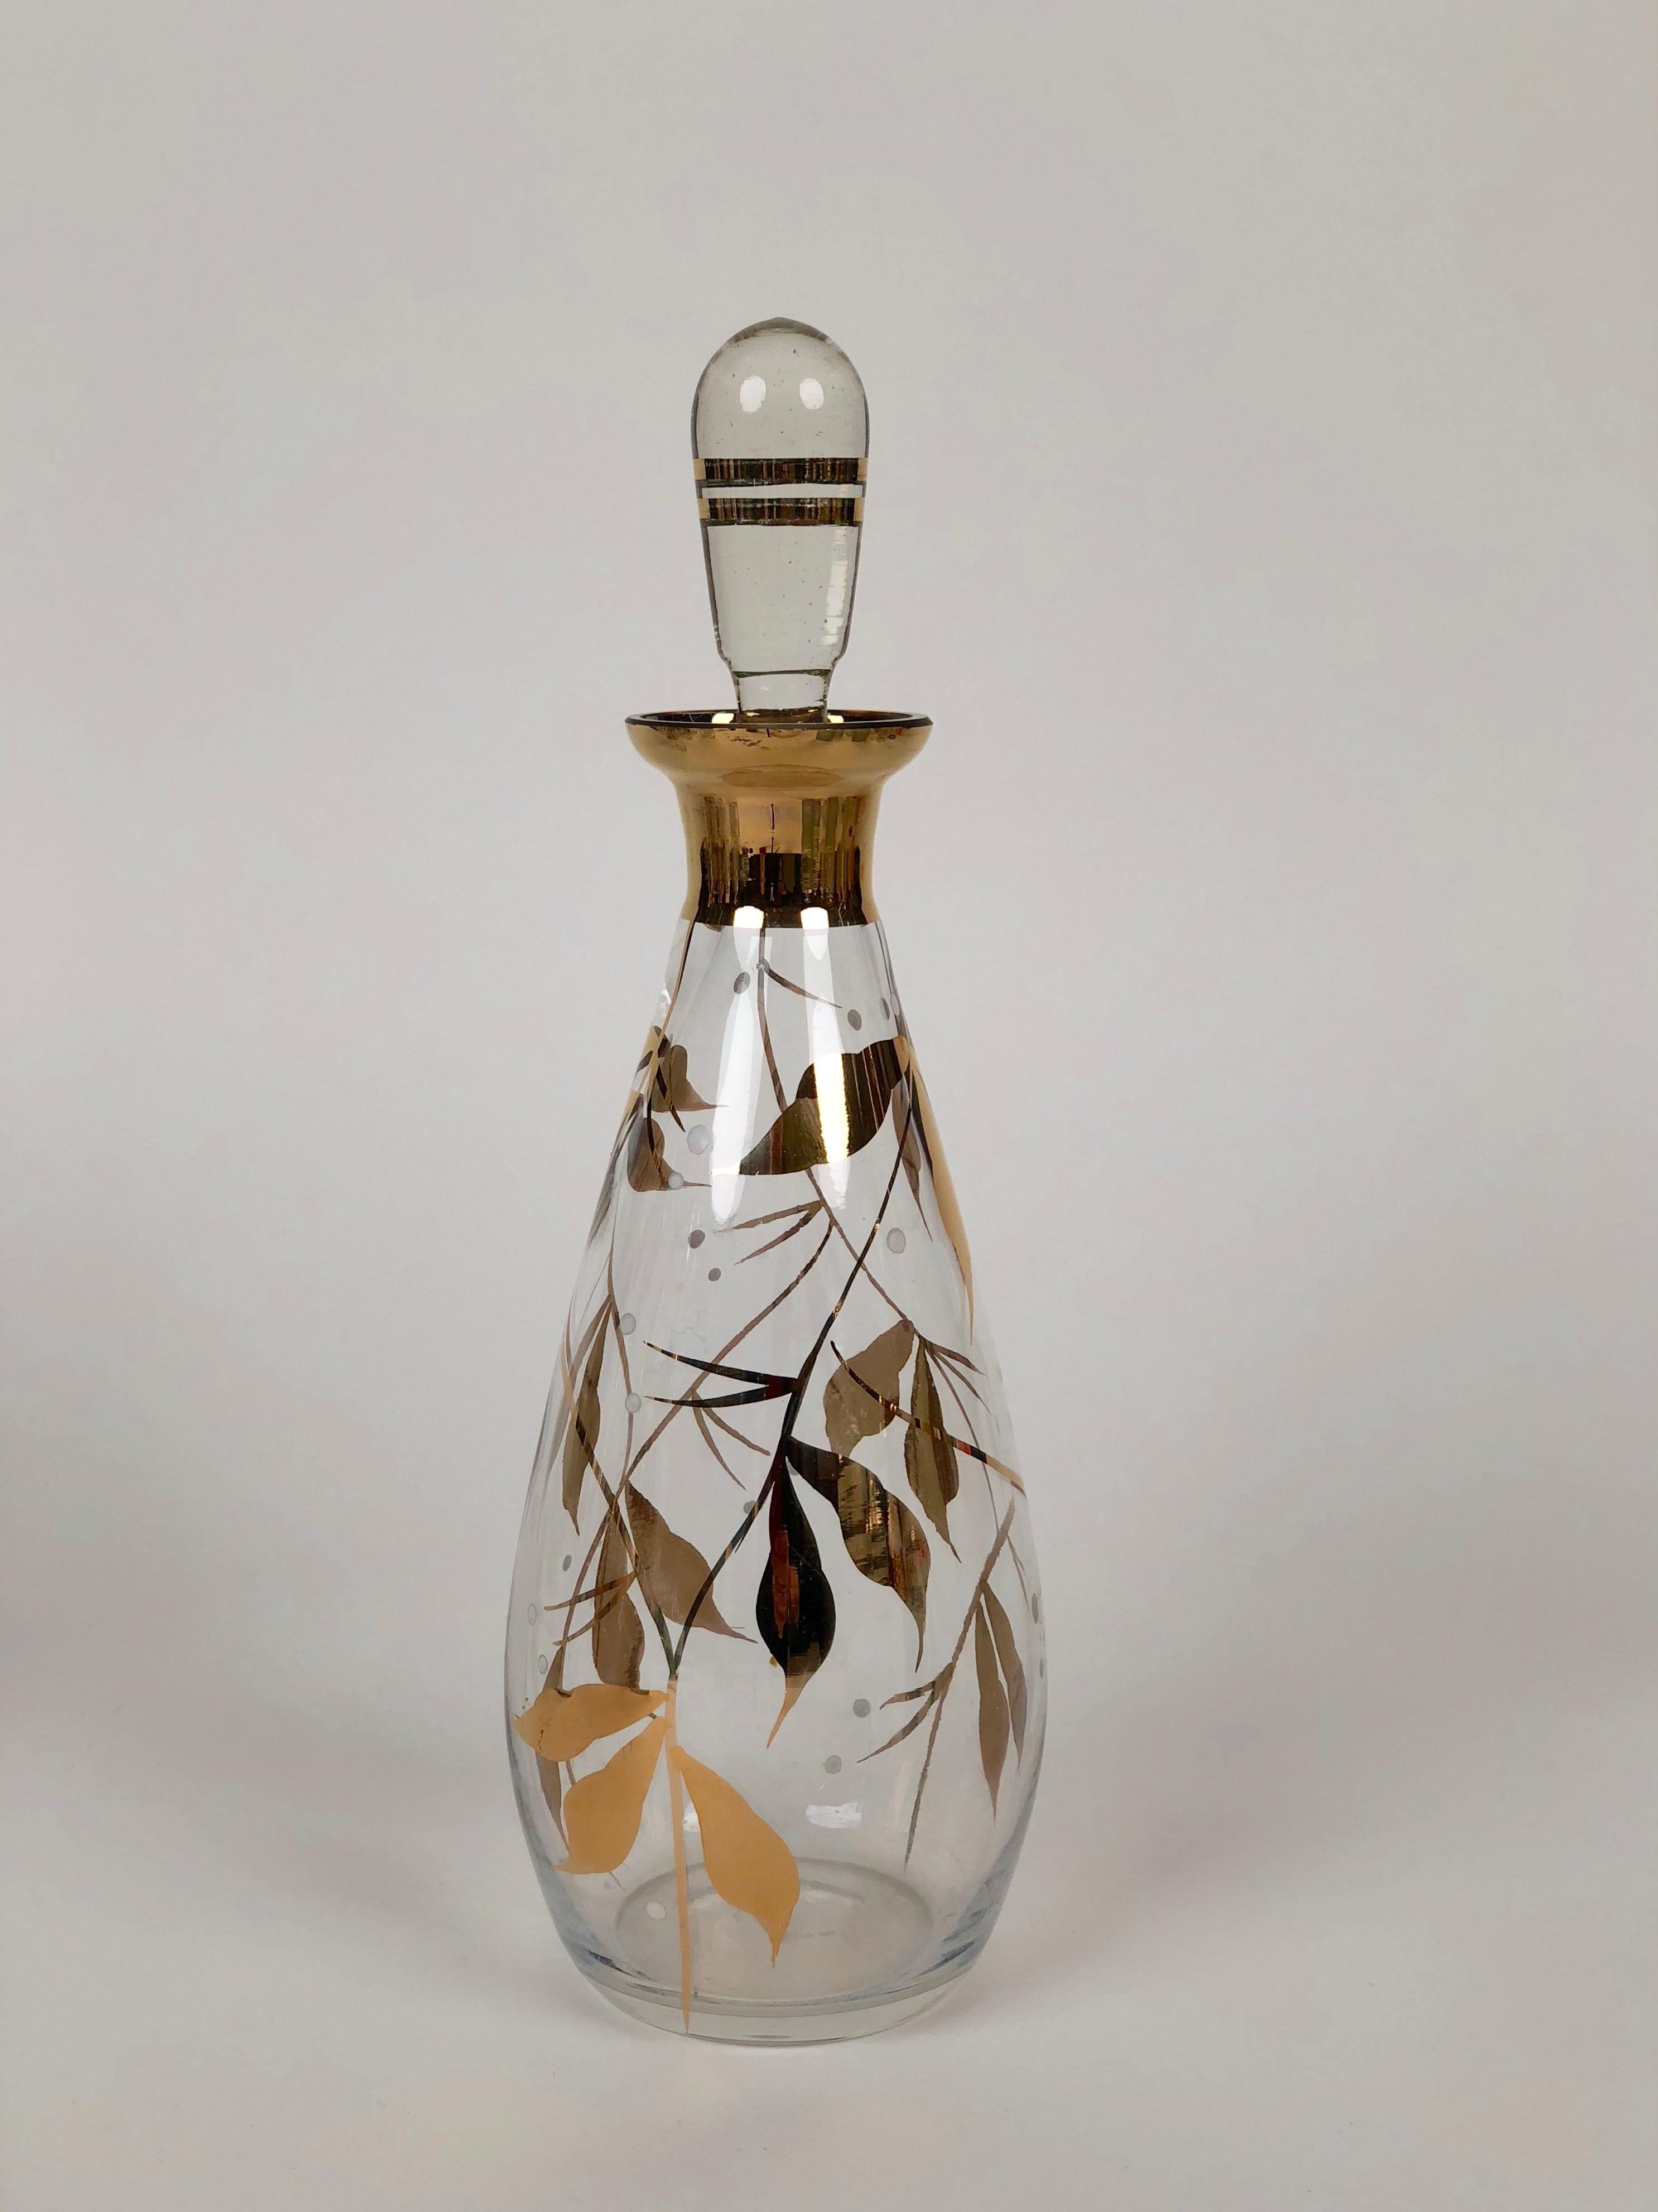 Glass carafe with hand painted floral pattern in gold and white.
Made in Czechoslovakia.

You can use them for liquor  or as a creative alternative  for oils
and vinegars .